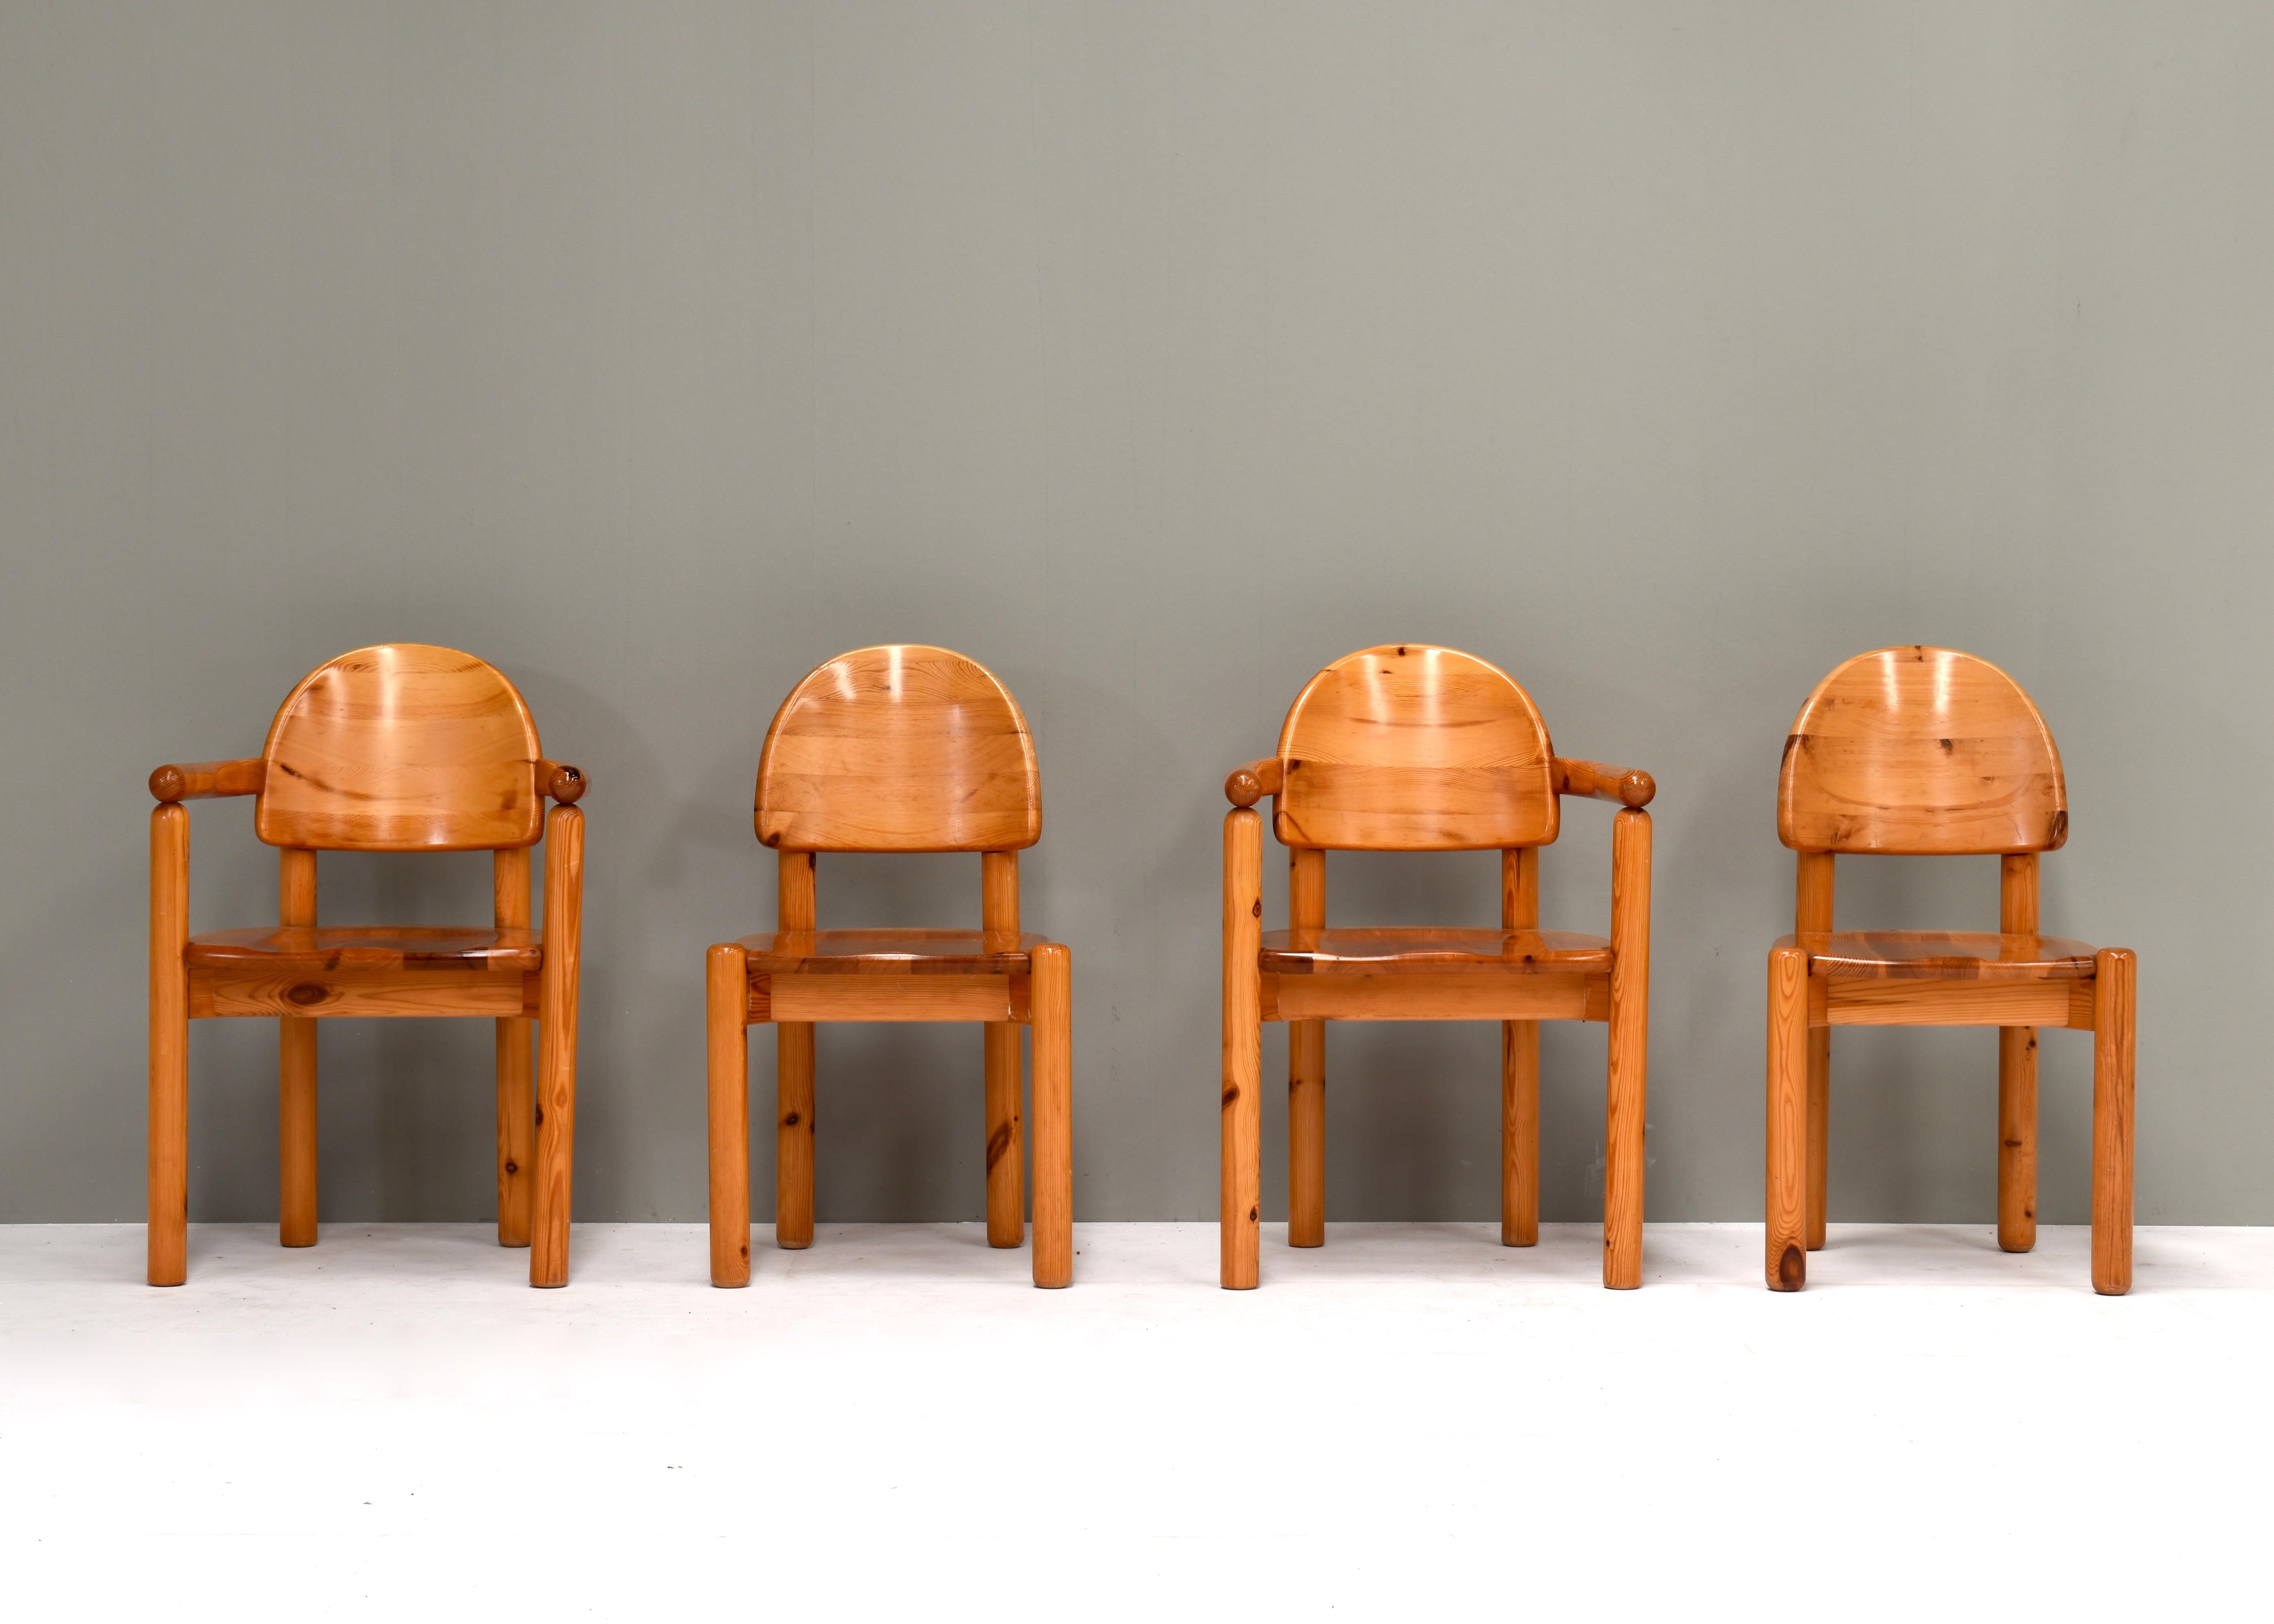 Rainer Daumiller Carver chairs for Hirtshals Savvaerk, Denmark, 1970’s.
Mid-century armchairs by the Danish architect Rainer Daumiller, produced by Hirtshals Sawmill during the late 1970s. We have four of these dining chairs available, with solid